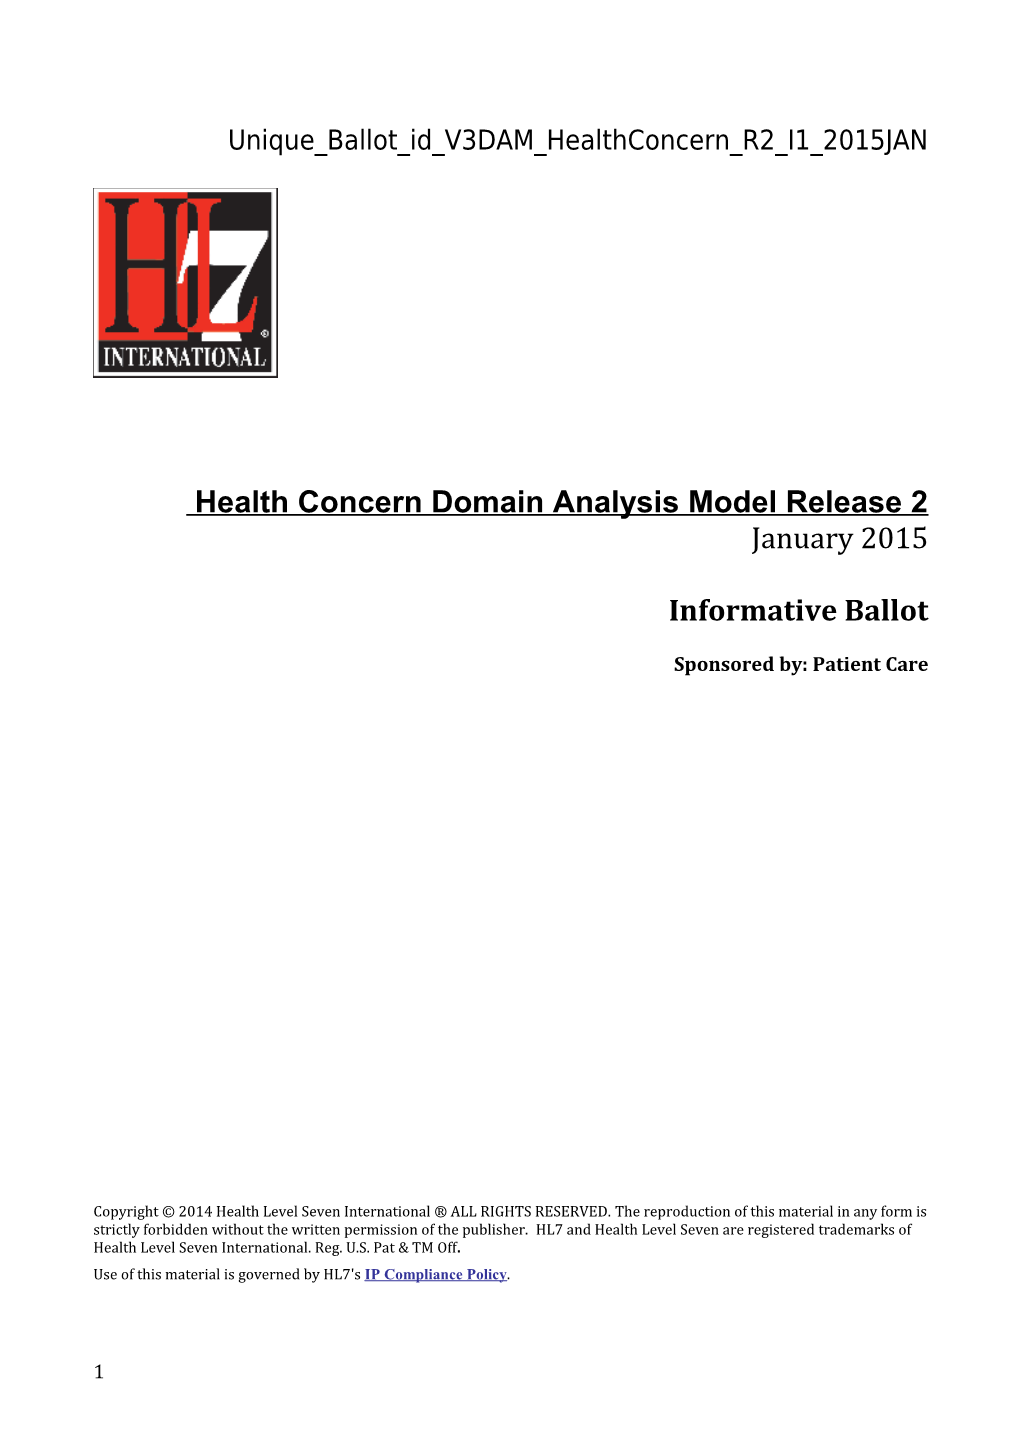 Health Concern Domain Analysis Model Release 2